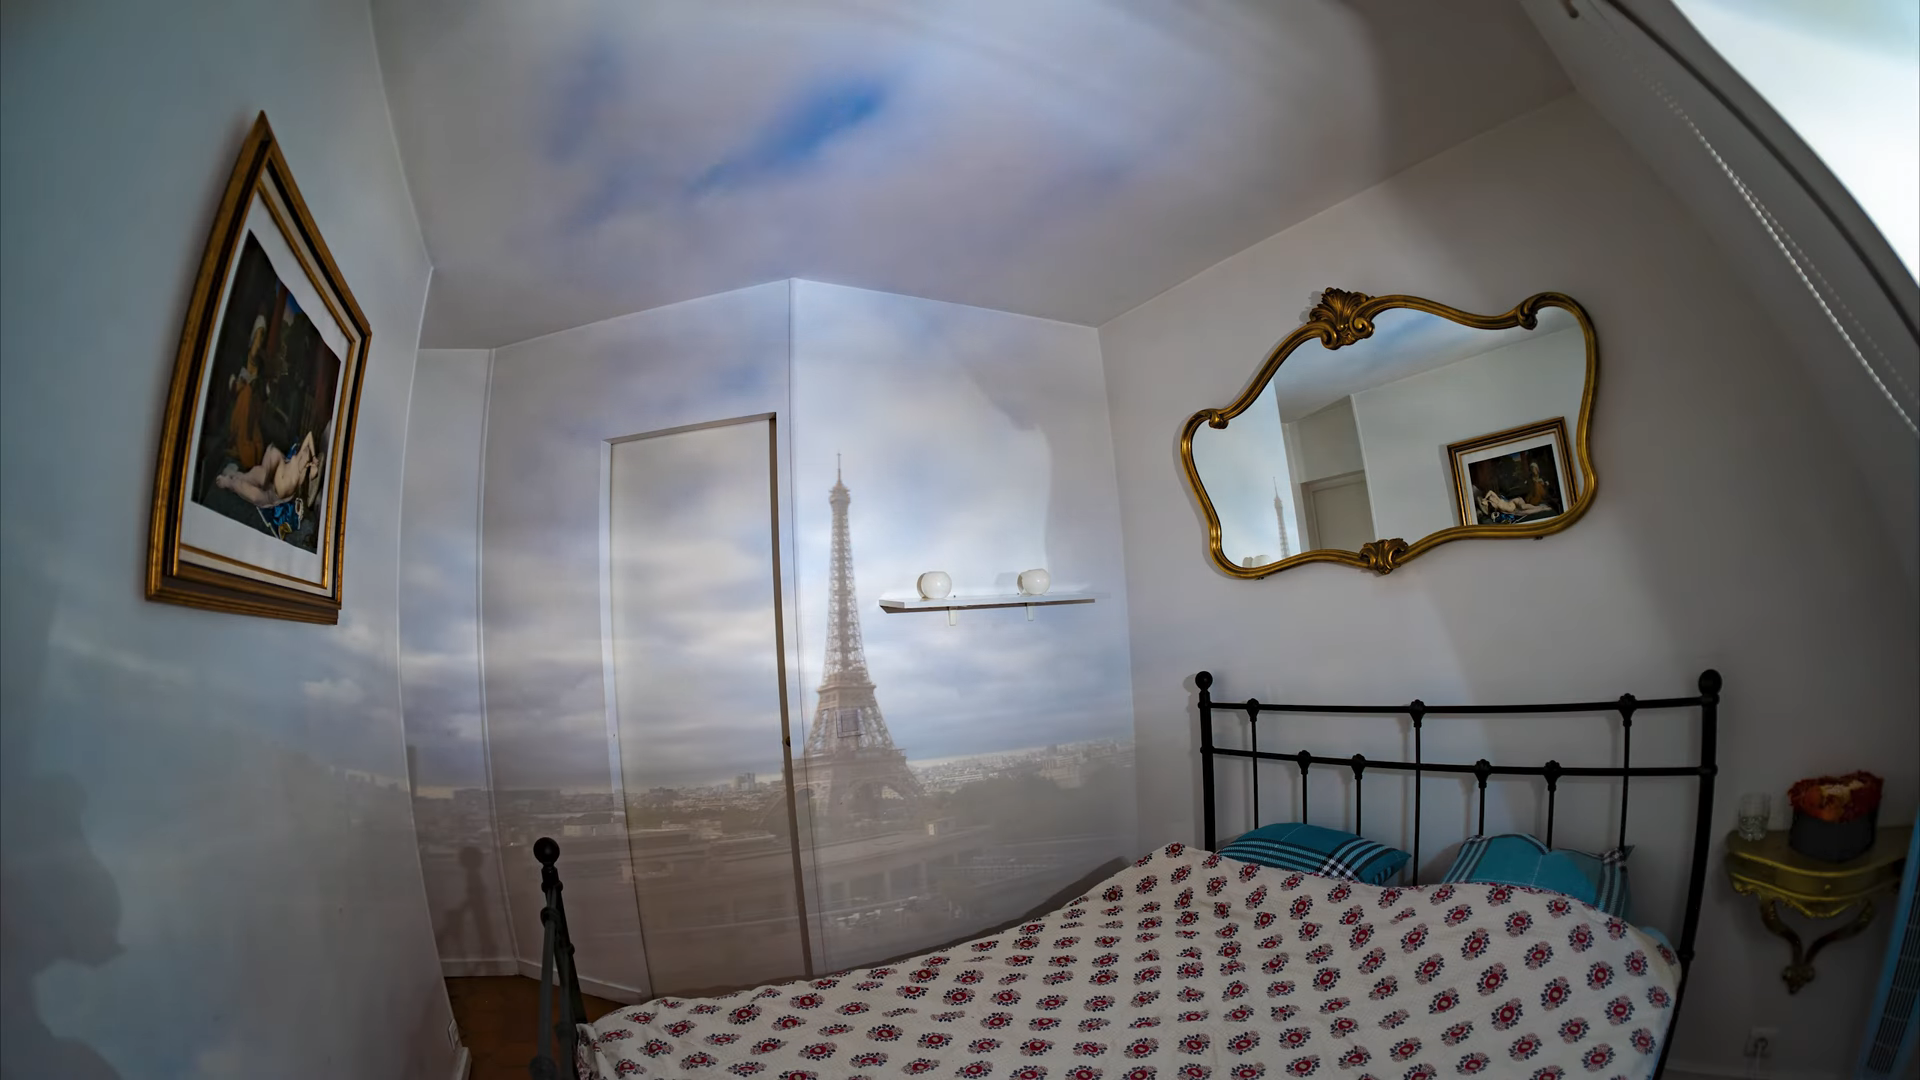 New Take On The Camera Obscura Brings Paris Indoors